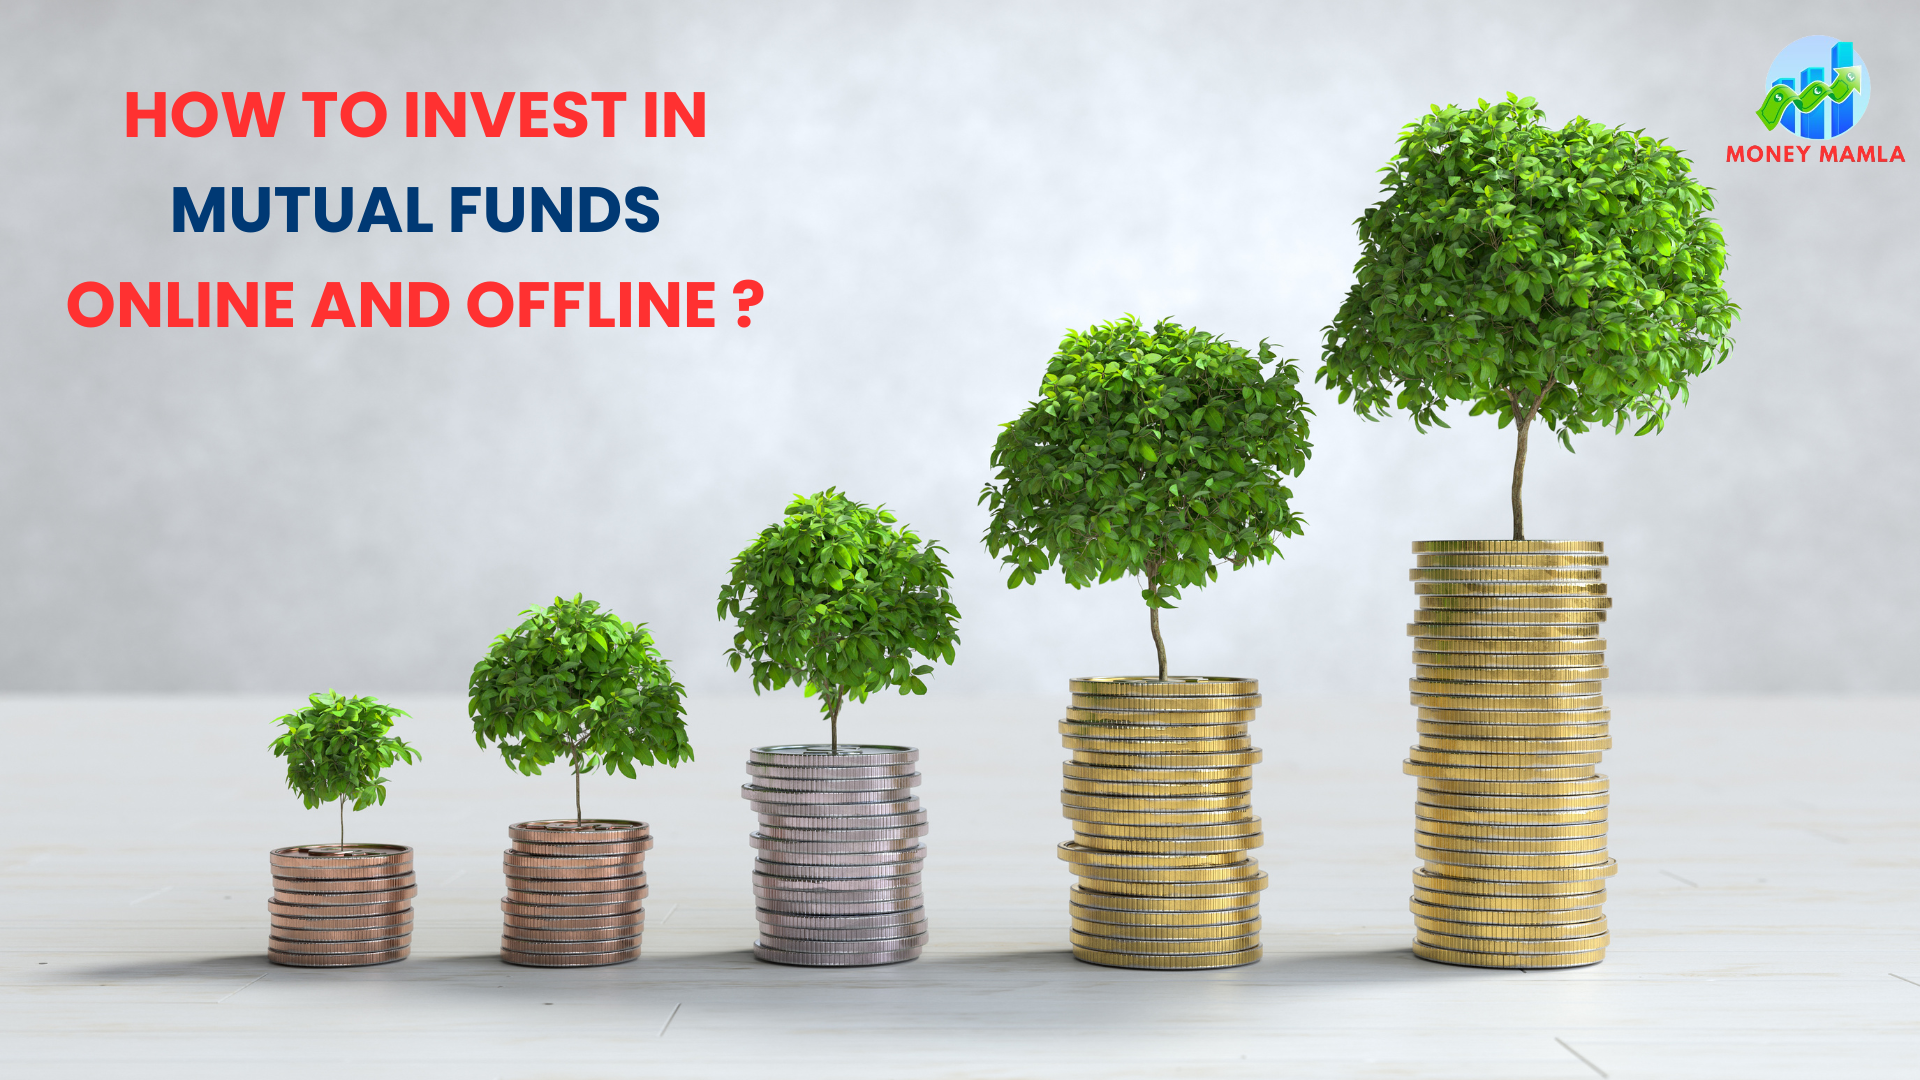 How to invest in mutual funds online and offline